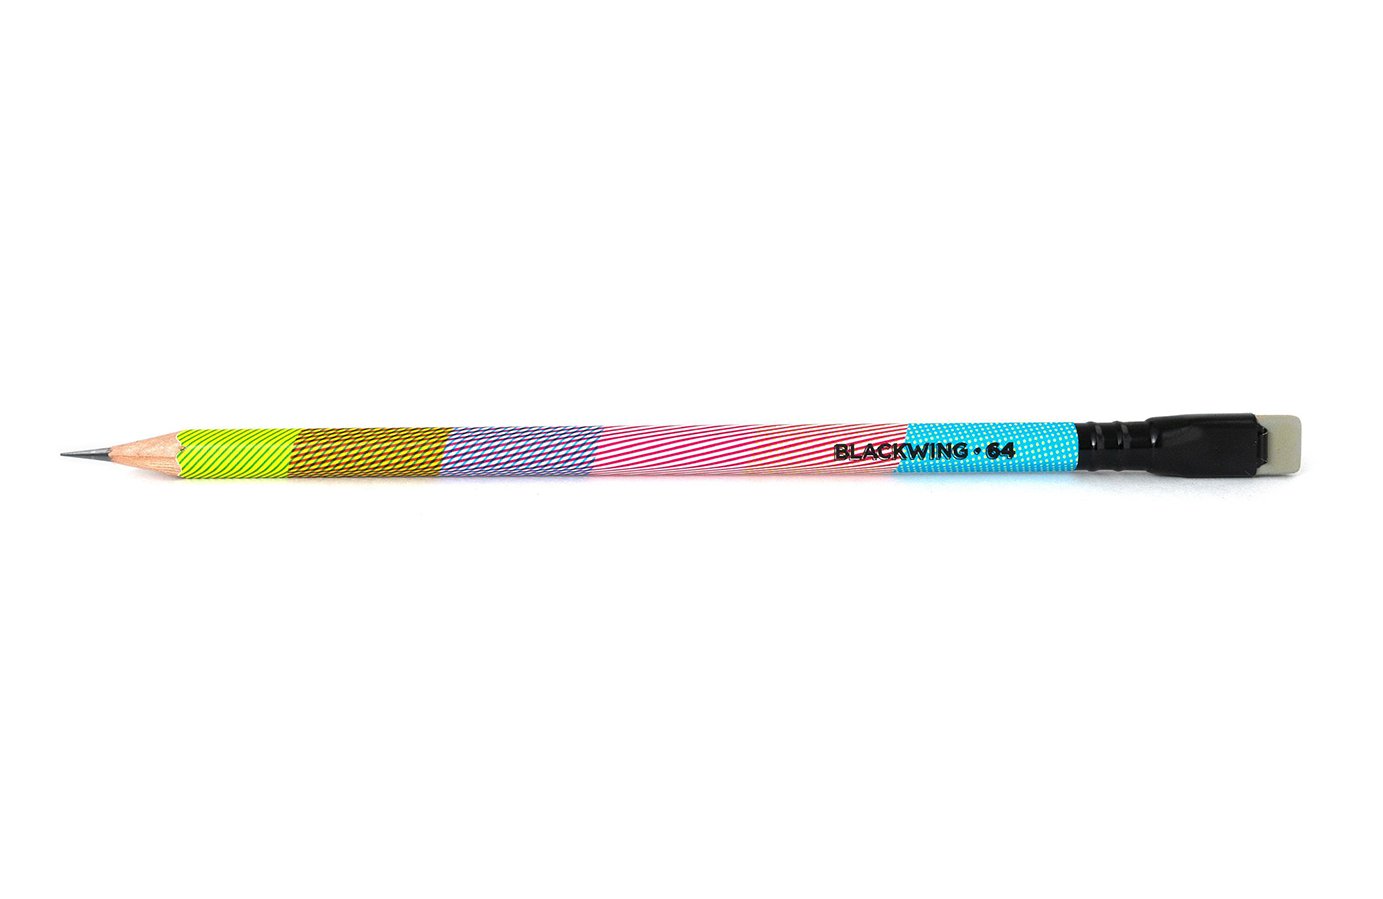 Blackwing Volume 64 limited edition